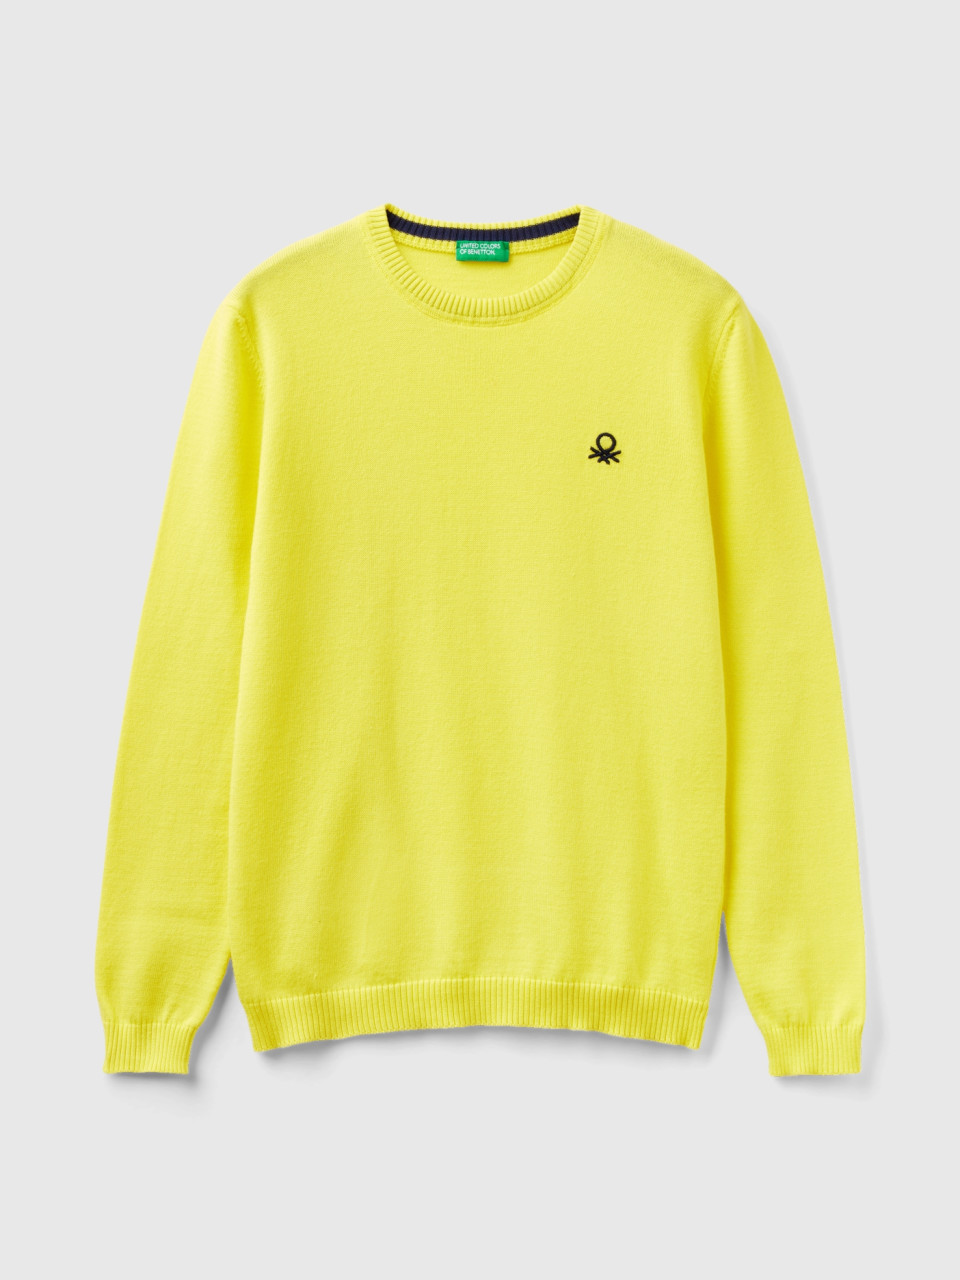 Benetton, Sweater In Pure Cotton With Logo, Yellow, Kids